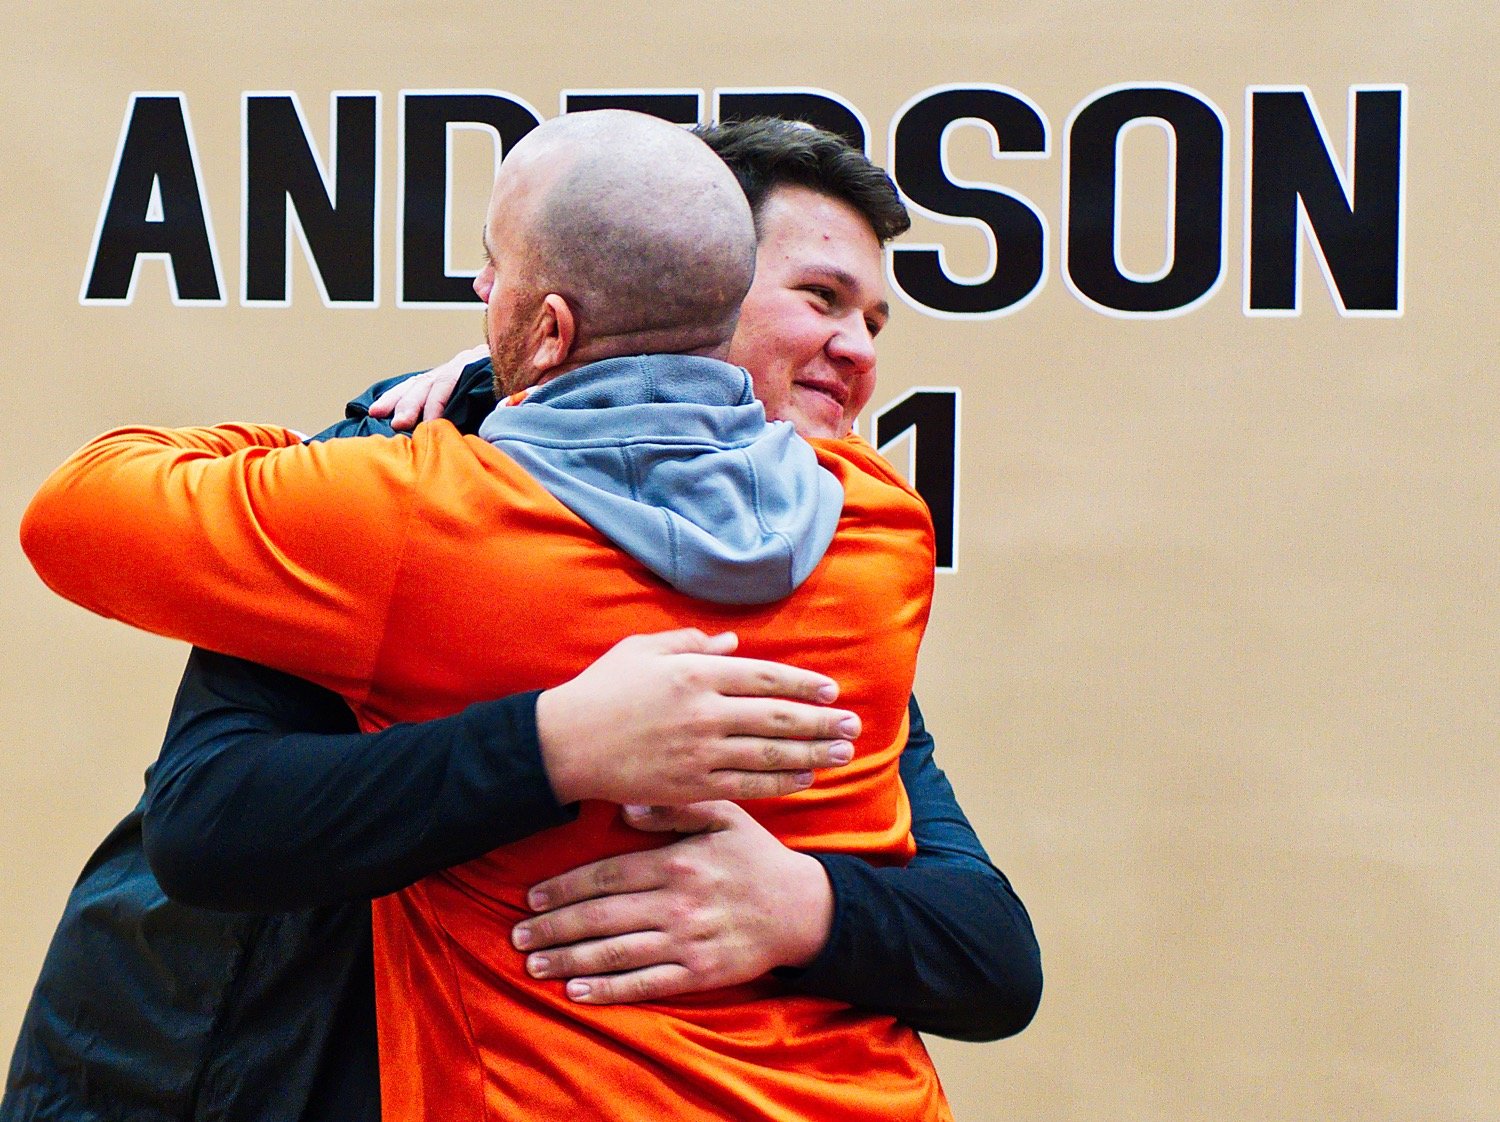 Jackson Anderson and Luke Blackwell hug after the ceremony.